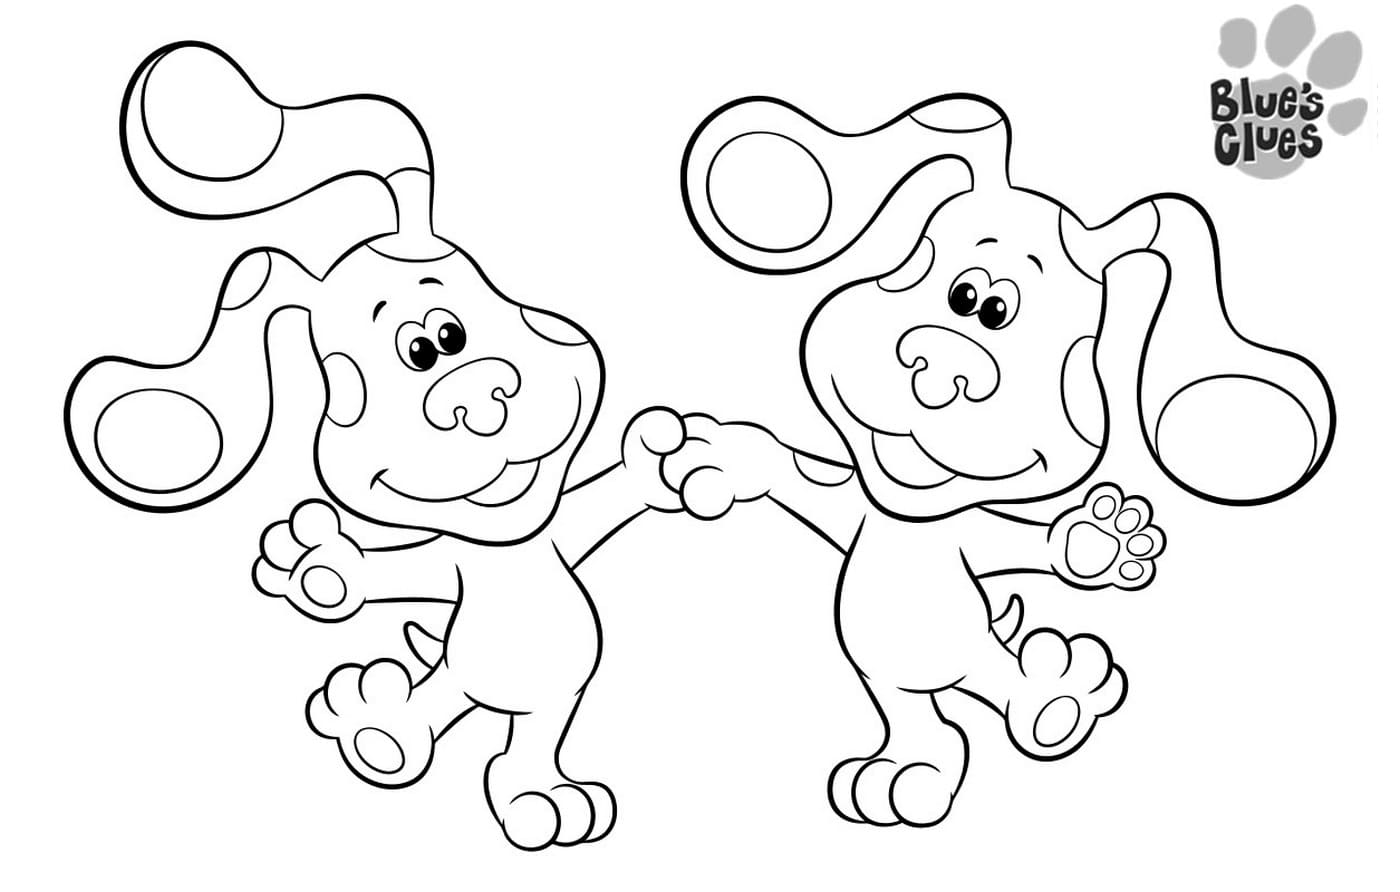 blues-clues-coloring-page-free-coloring-pages-for-kids